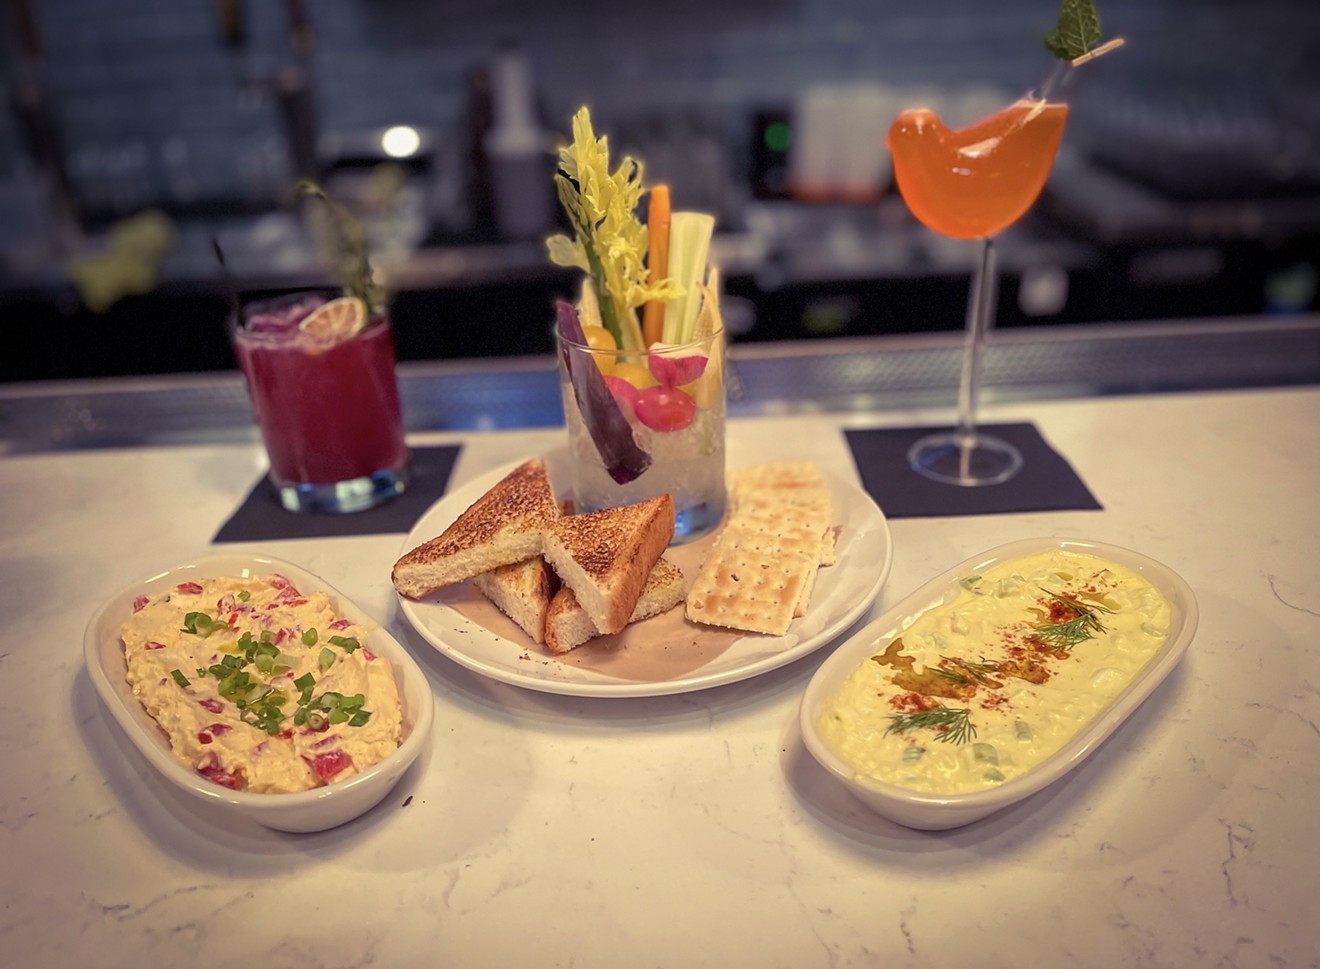 Pimento cheese, egg salad, margarita and the Ginger Bird drink